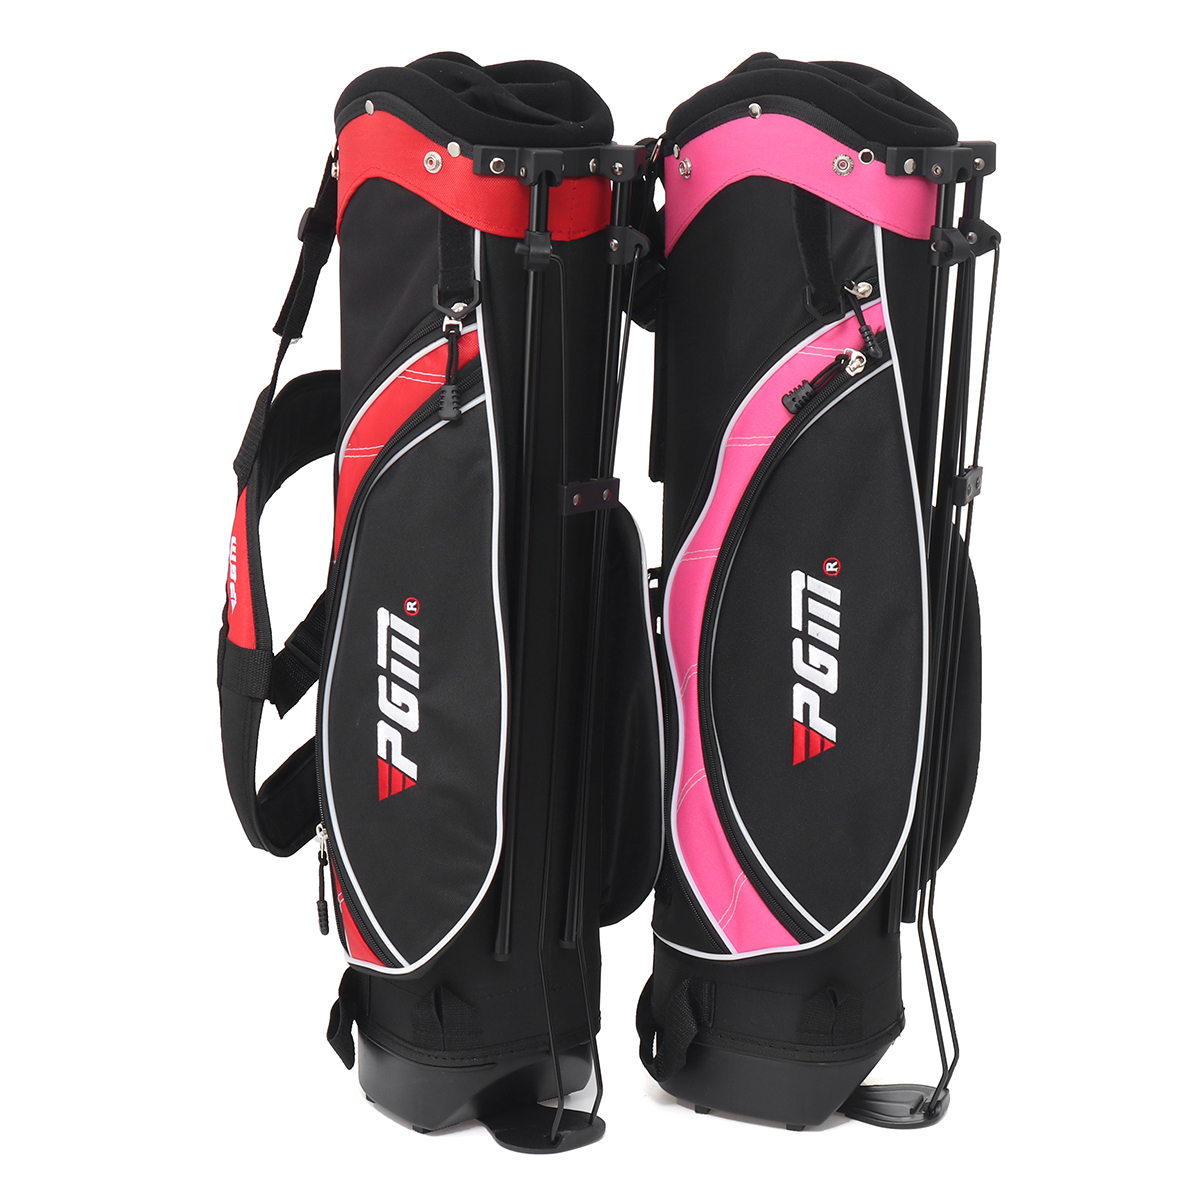 Childrens-Golf-Bag-Golf-Support-Ultra-Light-Stand-Portable-Large-Capacity-Double-Shoulder-Strap-For--1810143-2